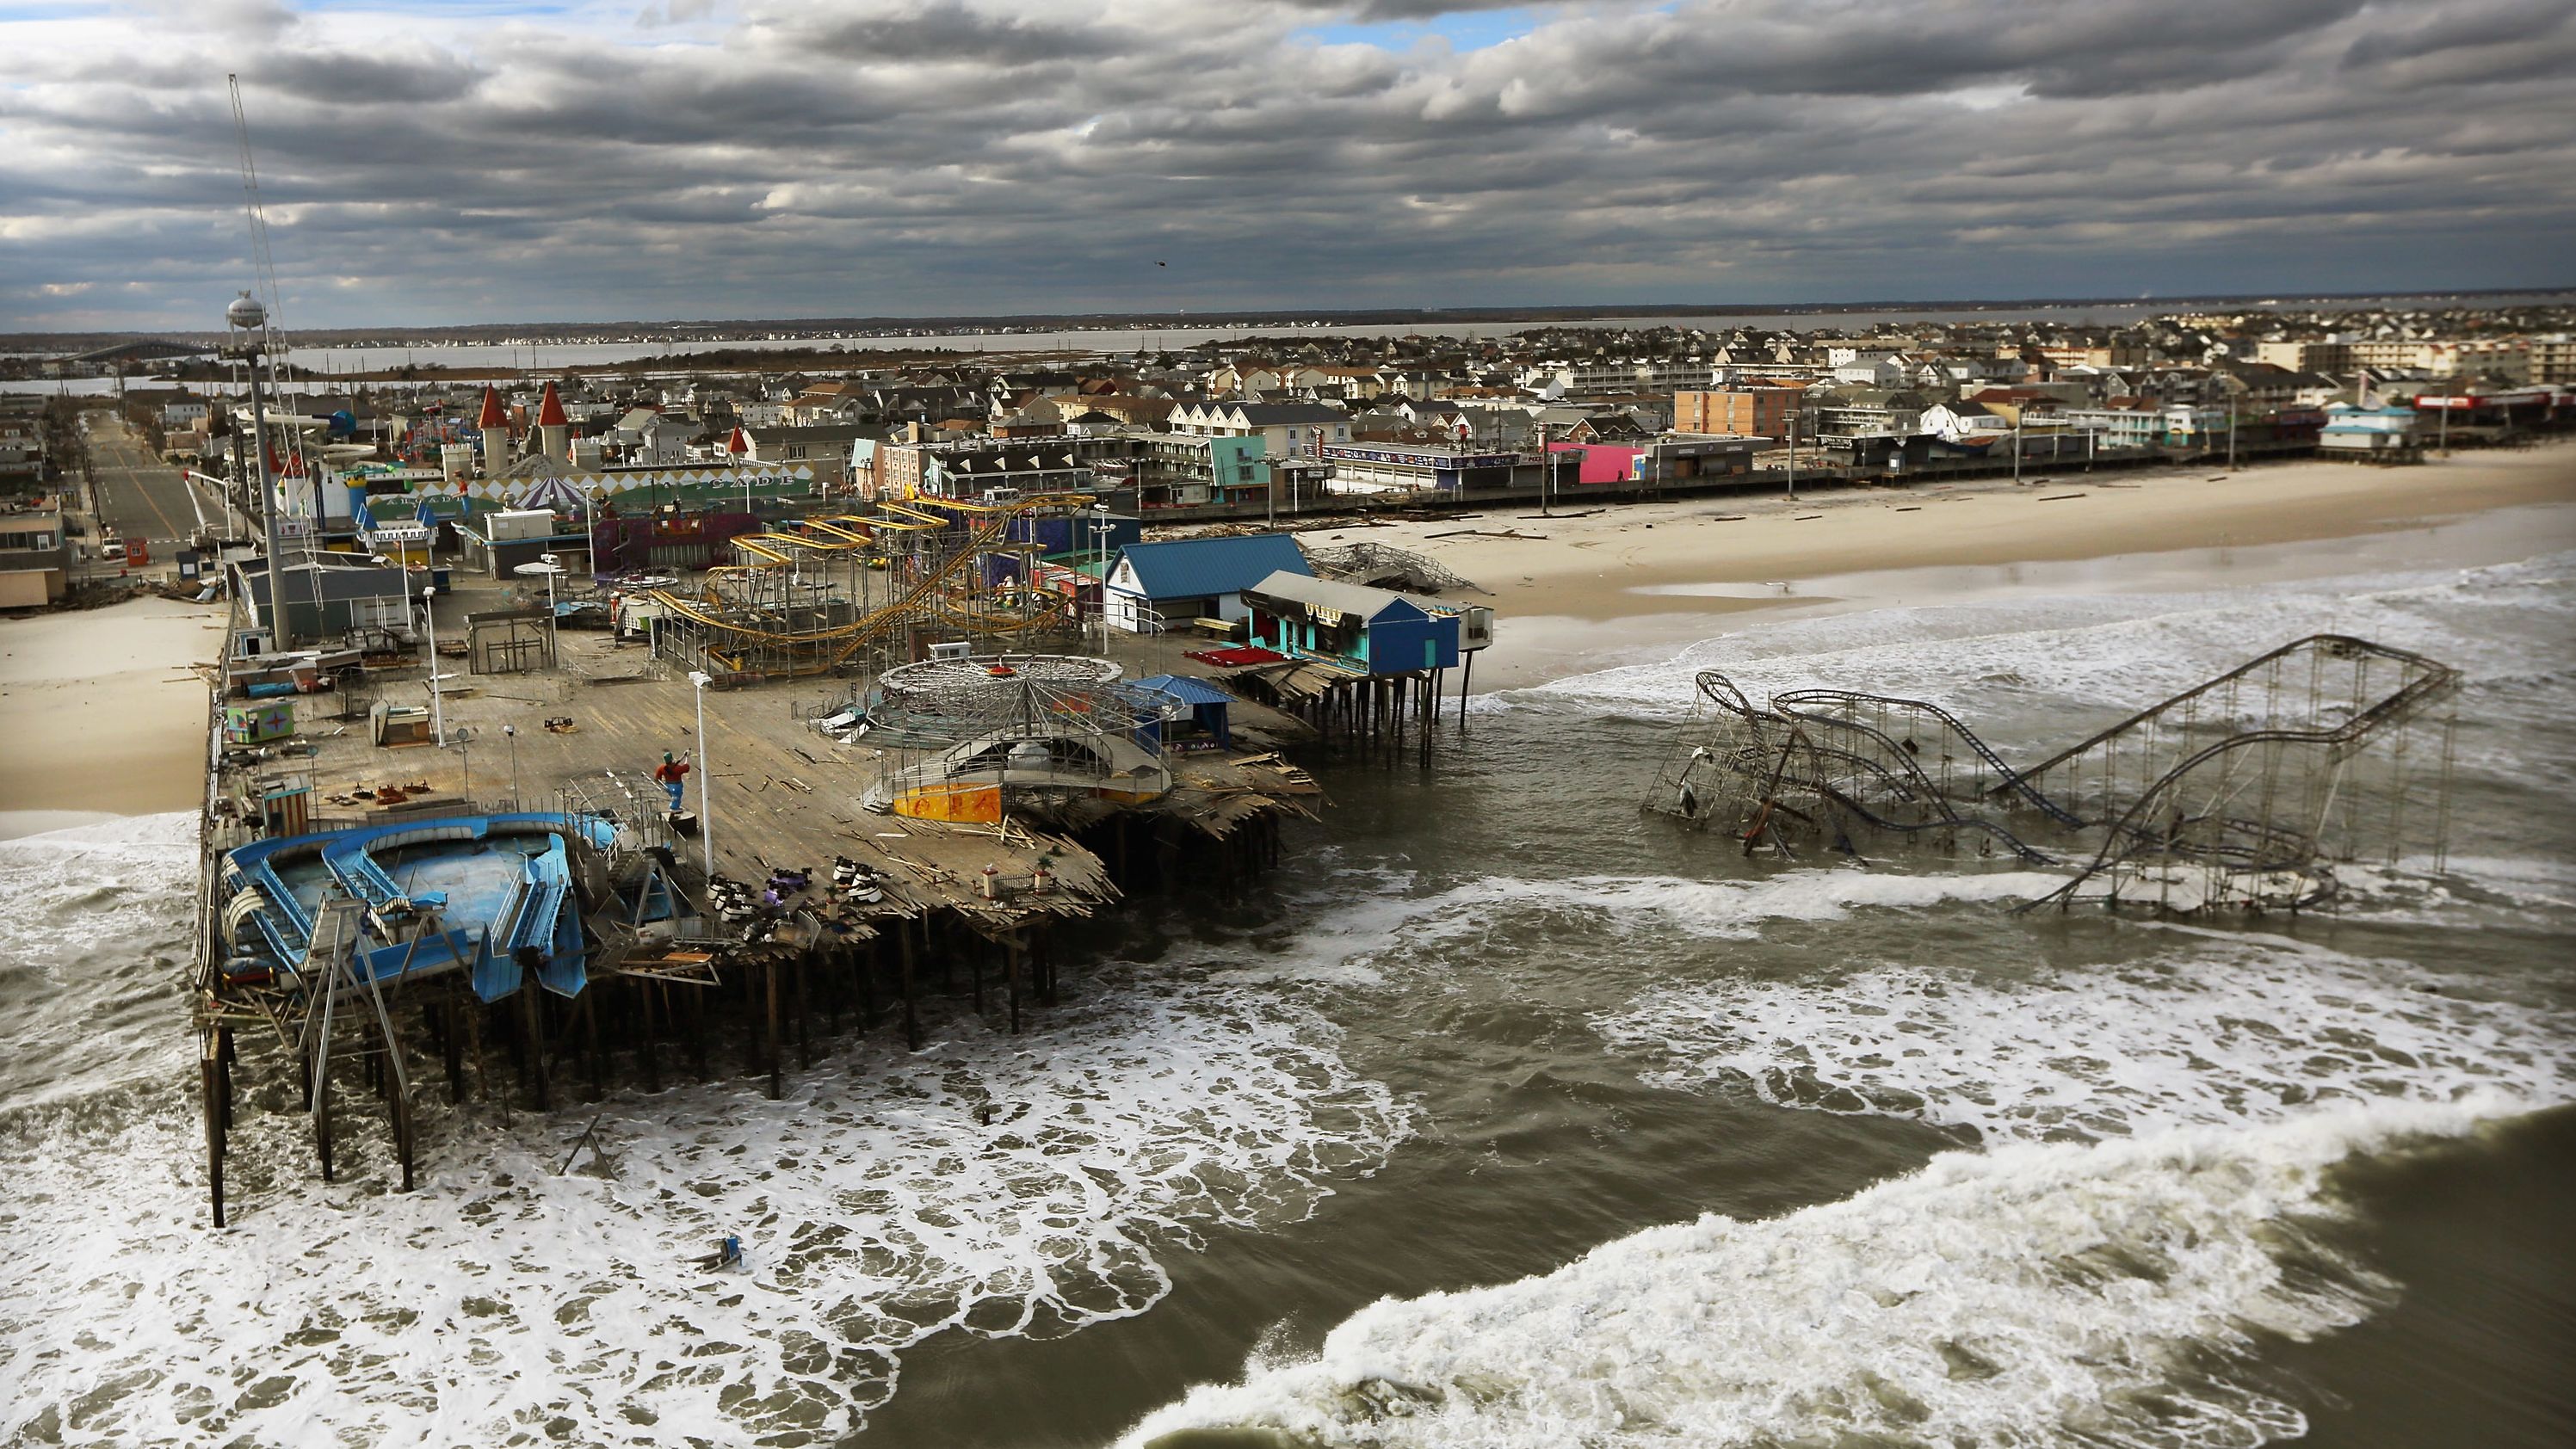 An amusement park in Seaside Heights, New Jersey, is left in ruins after Hurricane Sandy hit the area in October 2012. <a href="https://www.cnn.com/2013/07/13/world/americas/hurricane-sandy-fast-facts/index.html" target="_blank">The storm</a> affected 24 states and all of the eastern seaboard, causing an estimated $70 billion in damages.